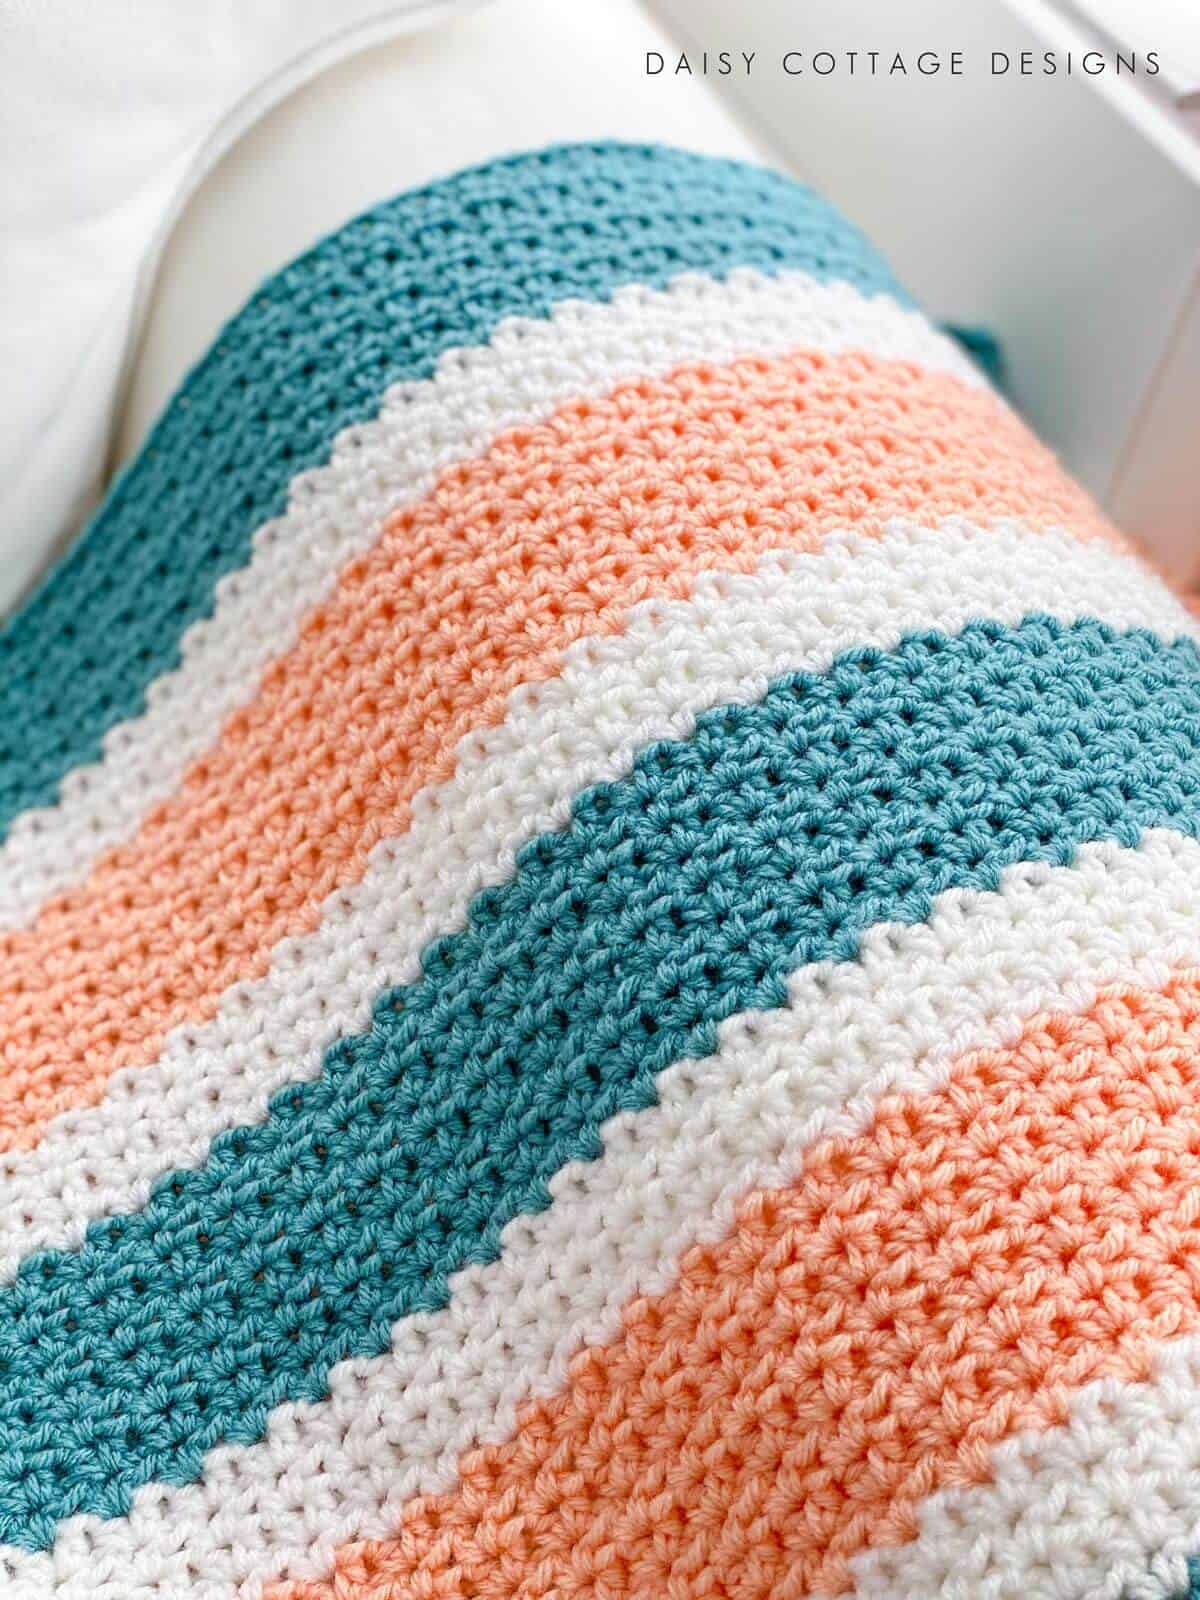 V Stitch Crochet at its finest! Learn how to create this gorgeous crochet blanket using use this quick and easy free crochet pattern.